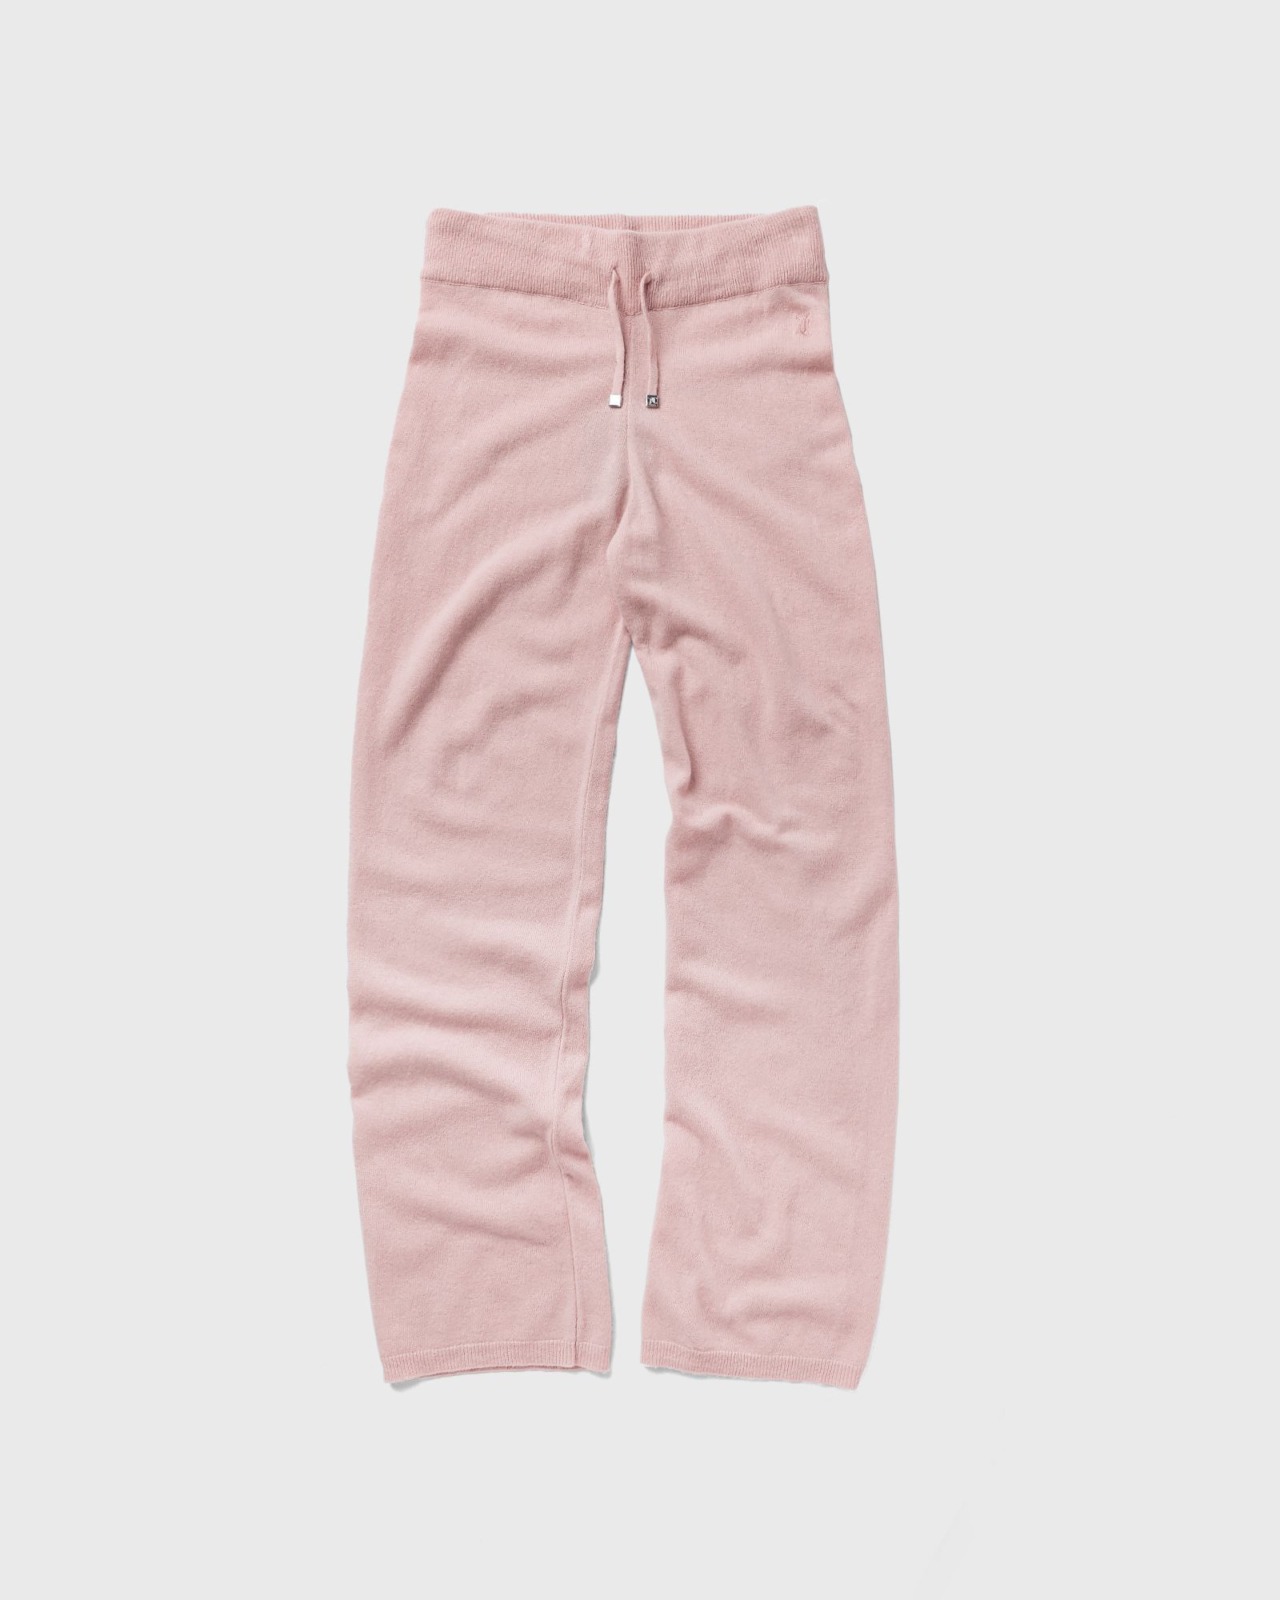 Womens Sweatpants Pink - Juicy Couture - Bstn GOOFASH